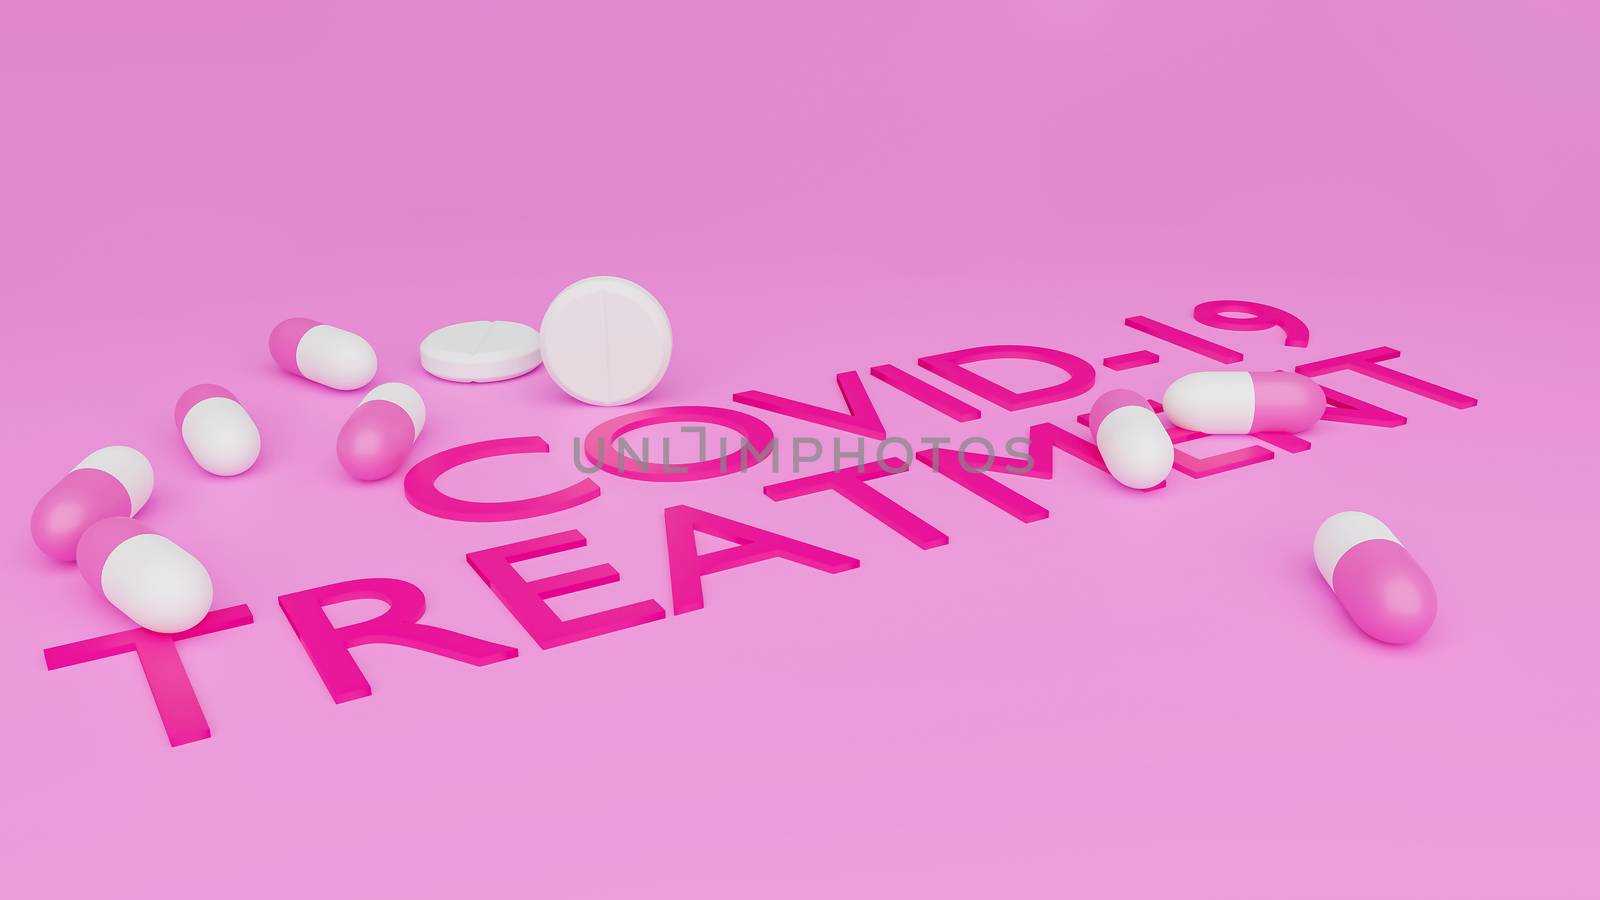 3D rendered of text and pills elements by Nawoot